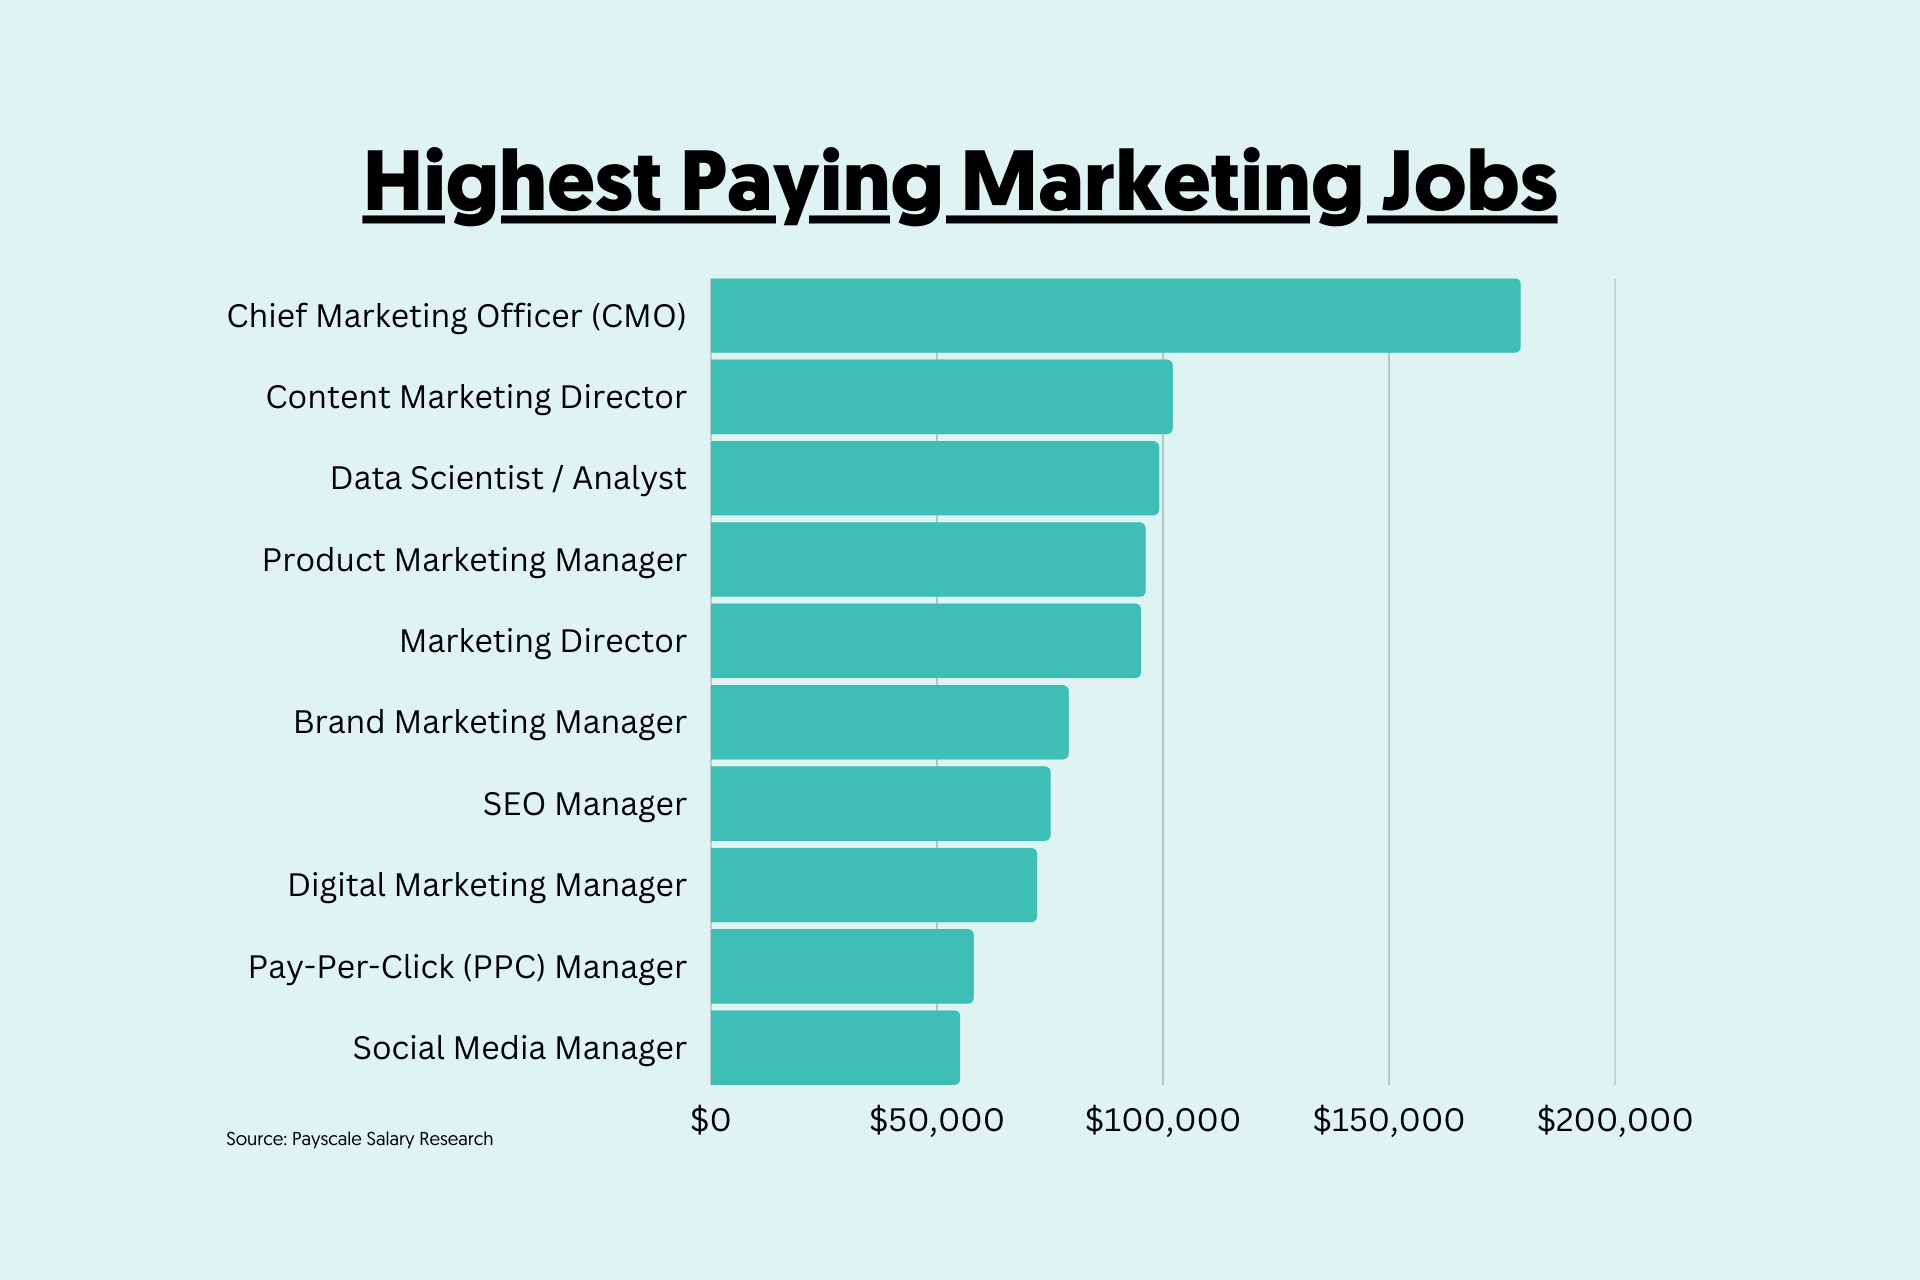 10 Top Highest Paying Marketing Jobs (Study)